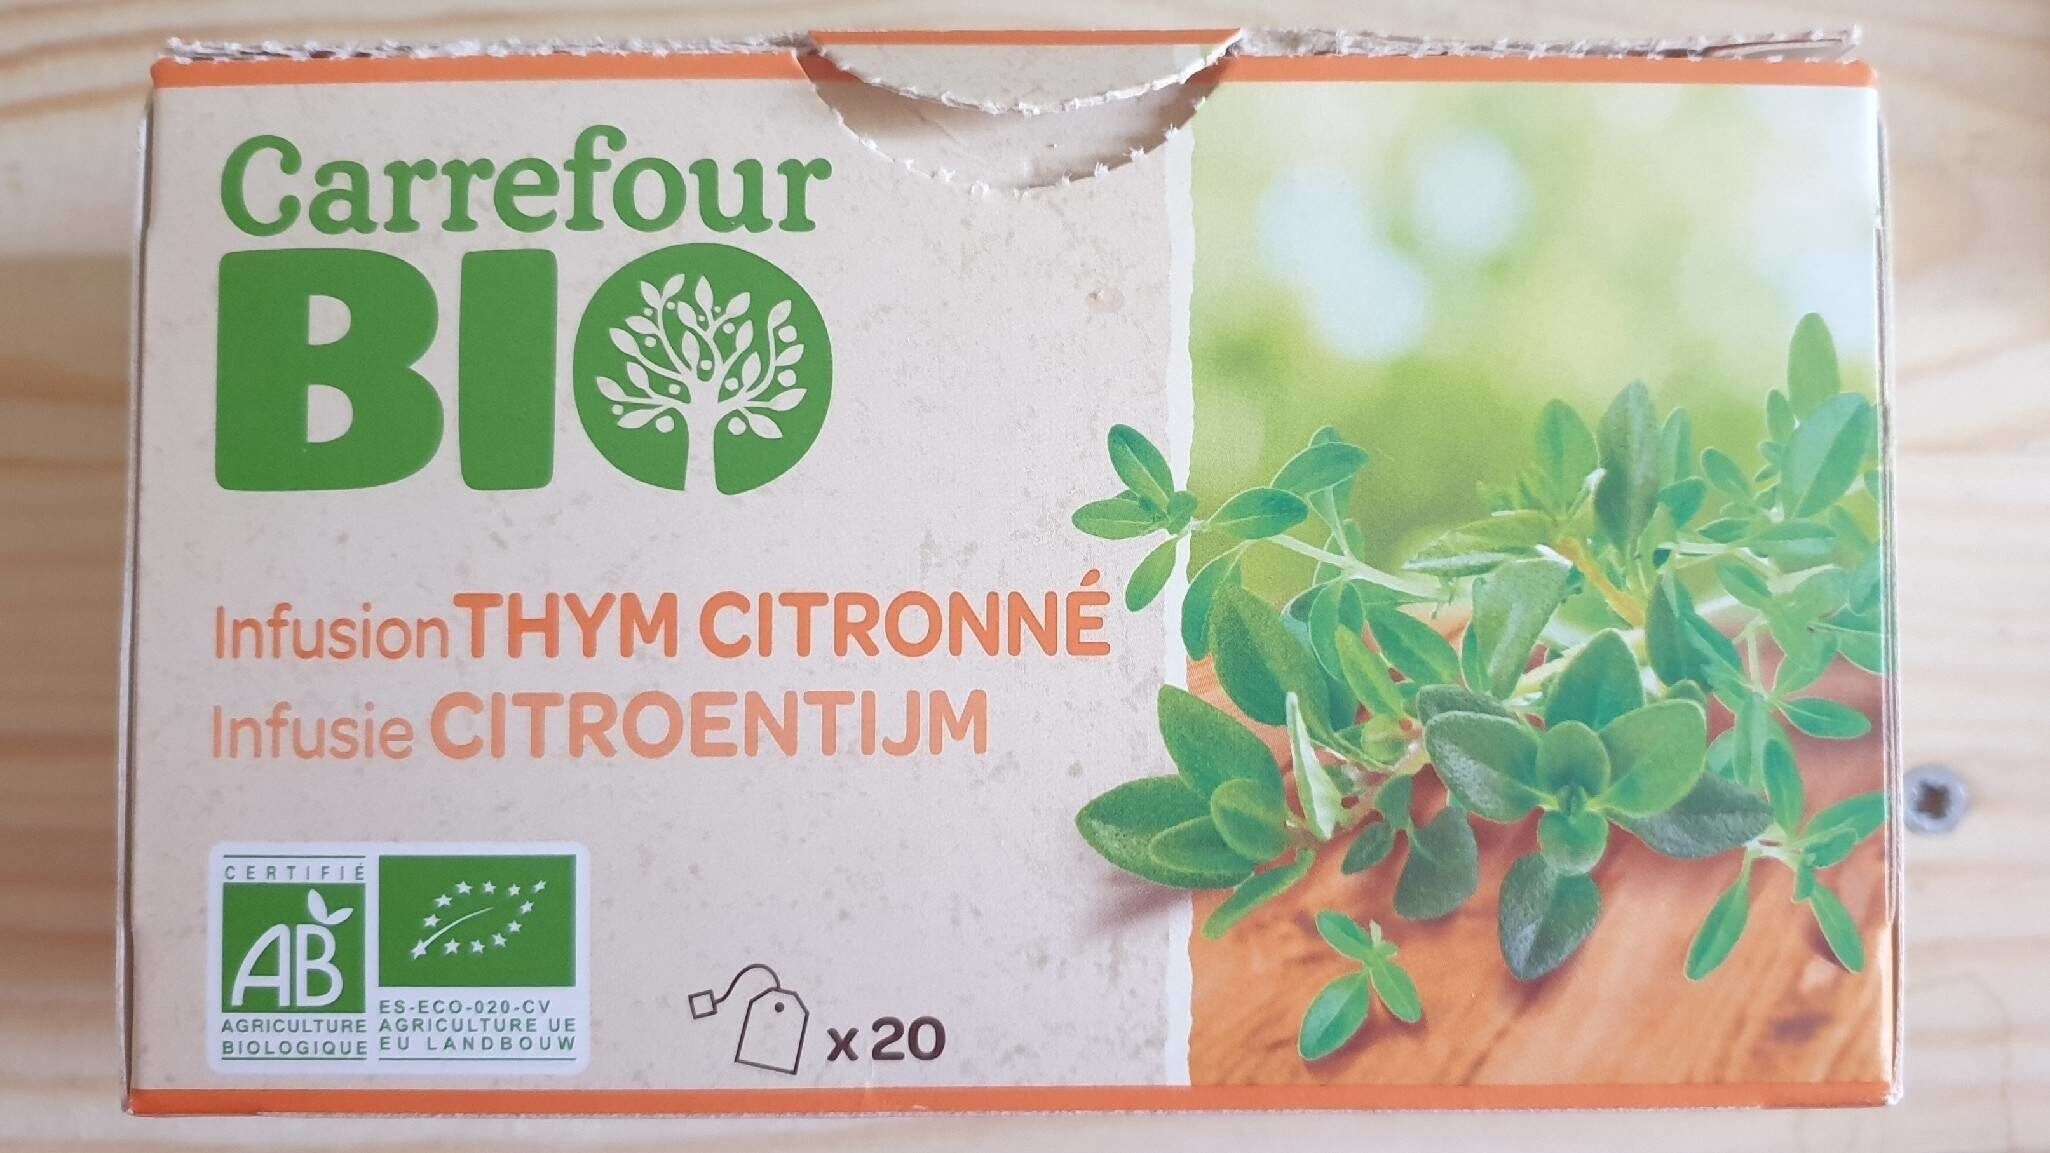 Infusion Thym Citronné - Product - fr